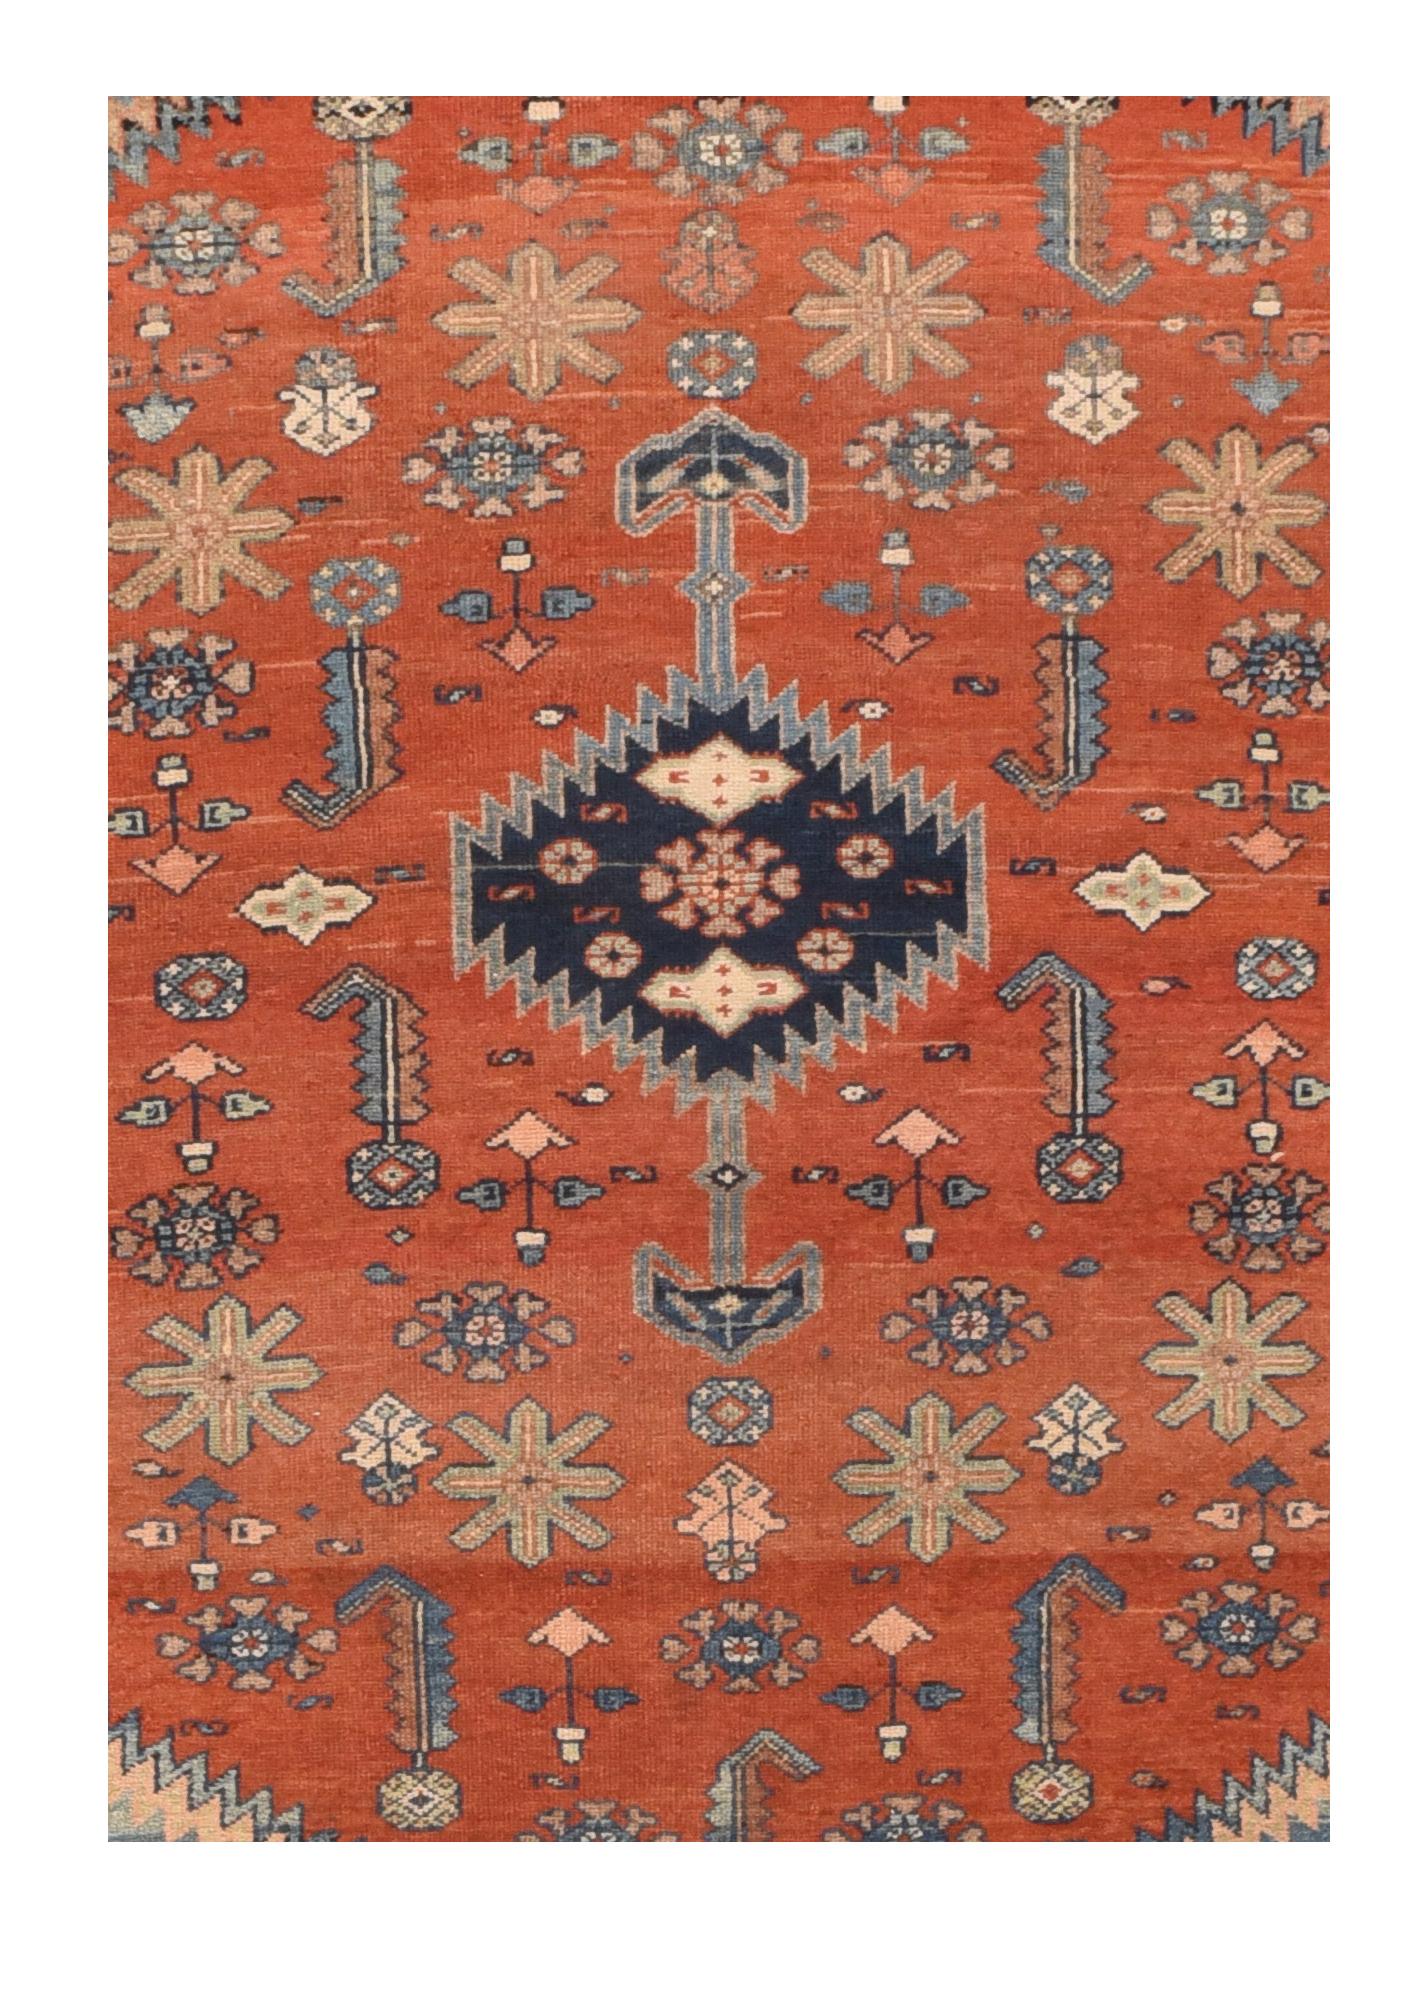 Antique Malayer rugs were woven in the small town of Malayer, located south of Hamedan on the road to Arak. The location in relation to these towns is significant, since Malayer rugs exhibit characteristics of both Hamedan and Sarouk rugs and